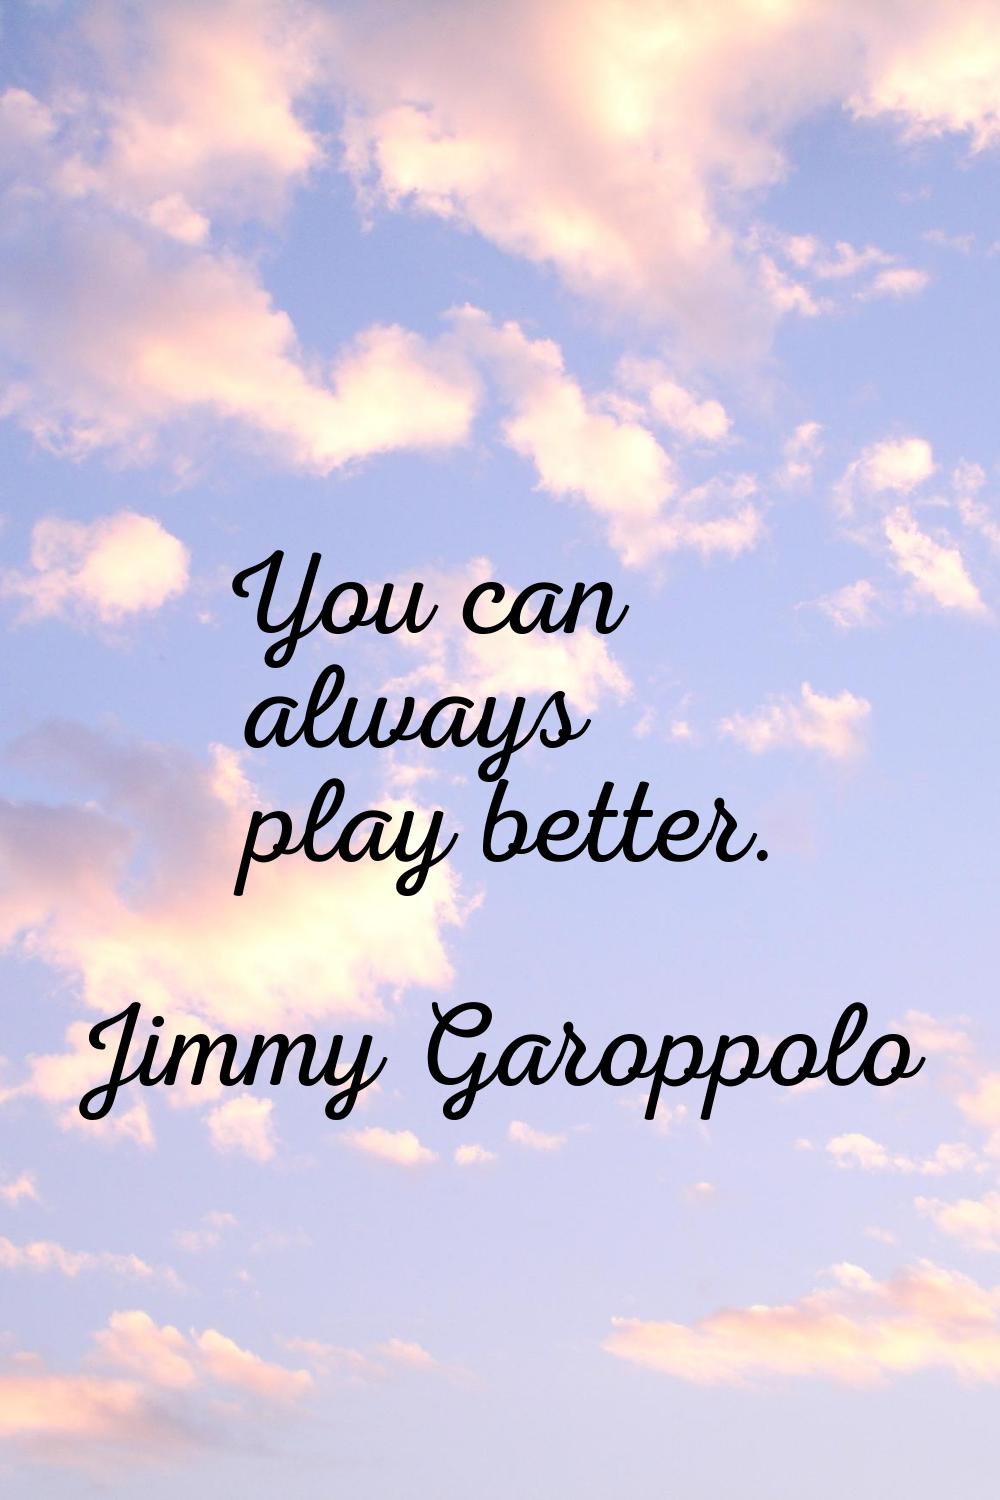 You can always play better.